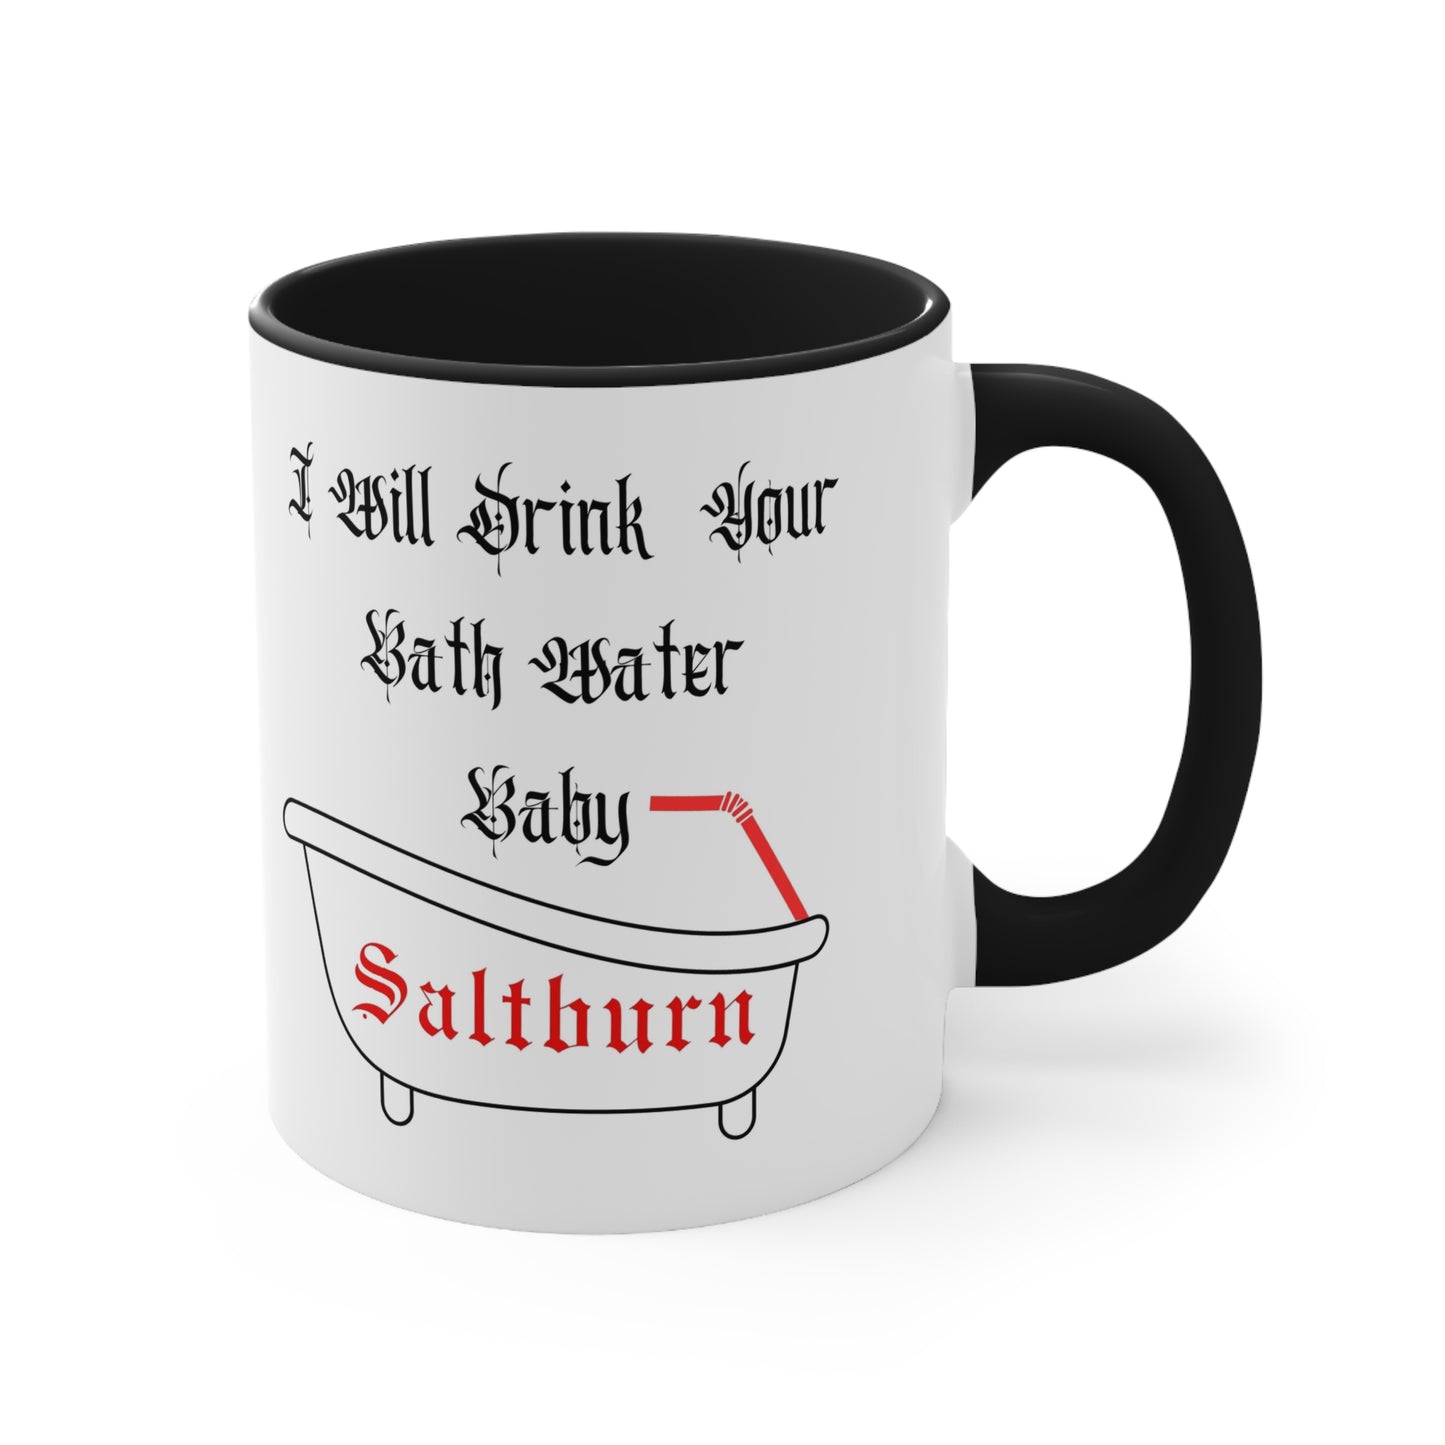 Saltburn Movie Inspired Ceramic Mug 11 oz with 5 different Colors | I will Drink Your Bath Water Baby Cermic Mug